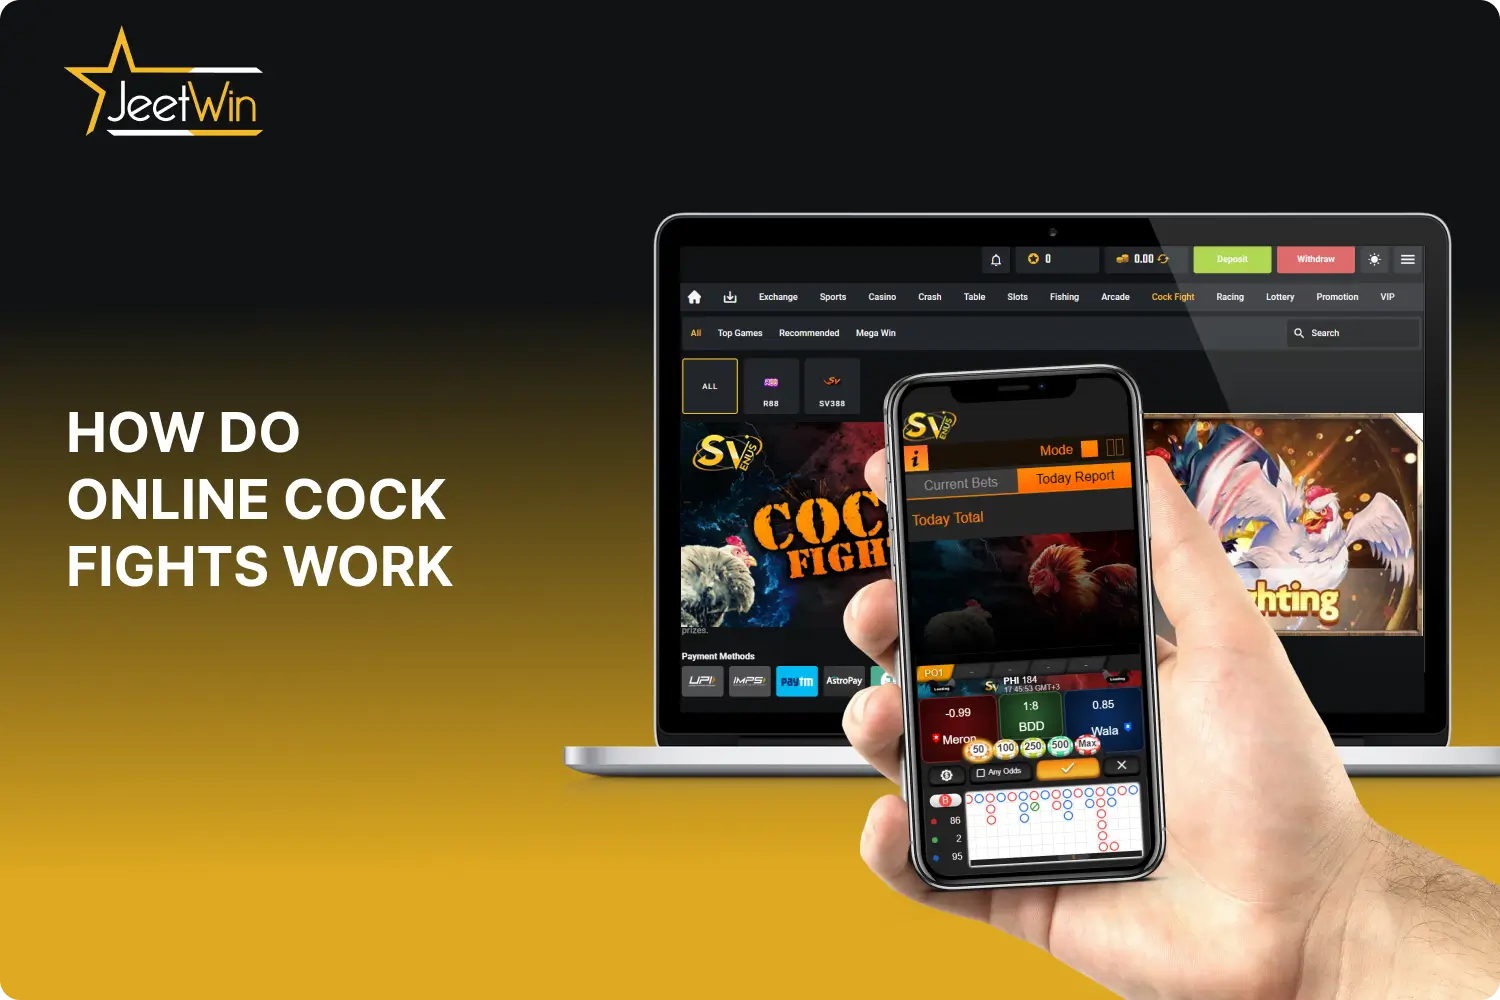 Online cock fights with a simple and straightforward betting system at Jeetwin is appreciated by users in India